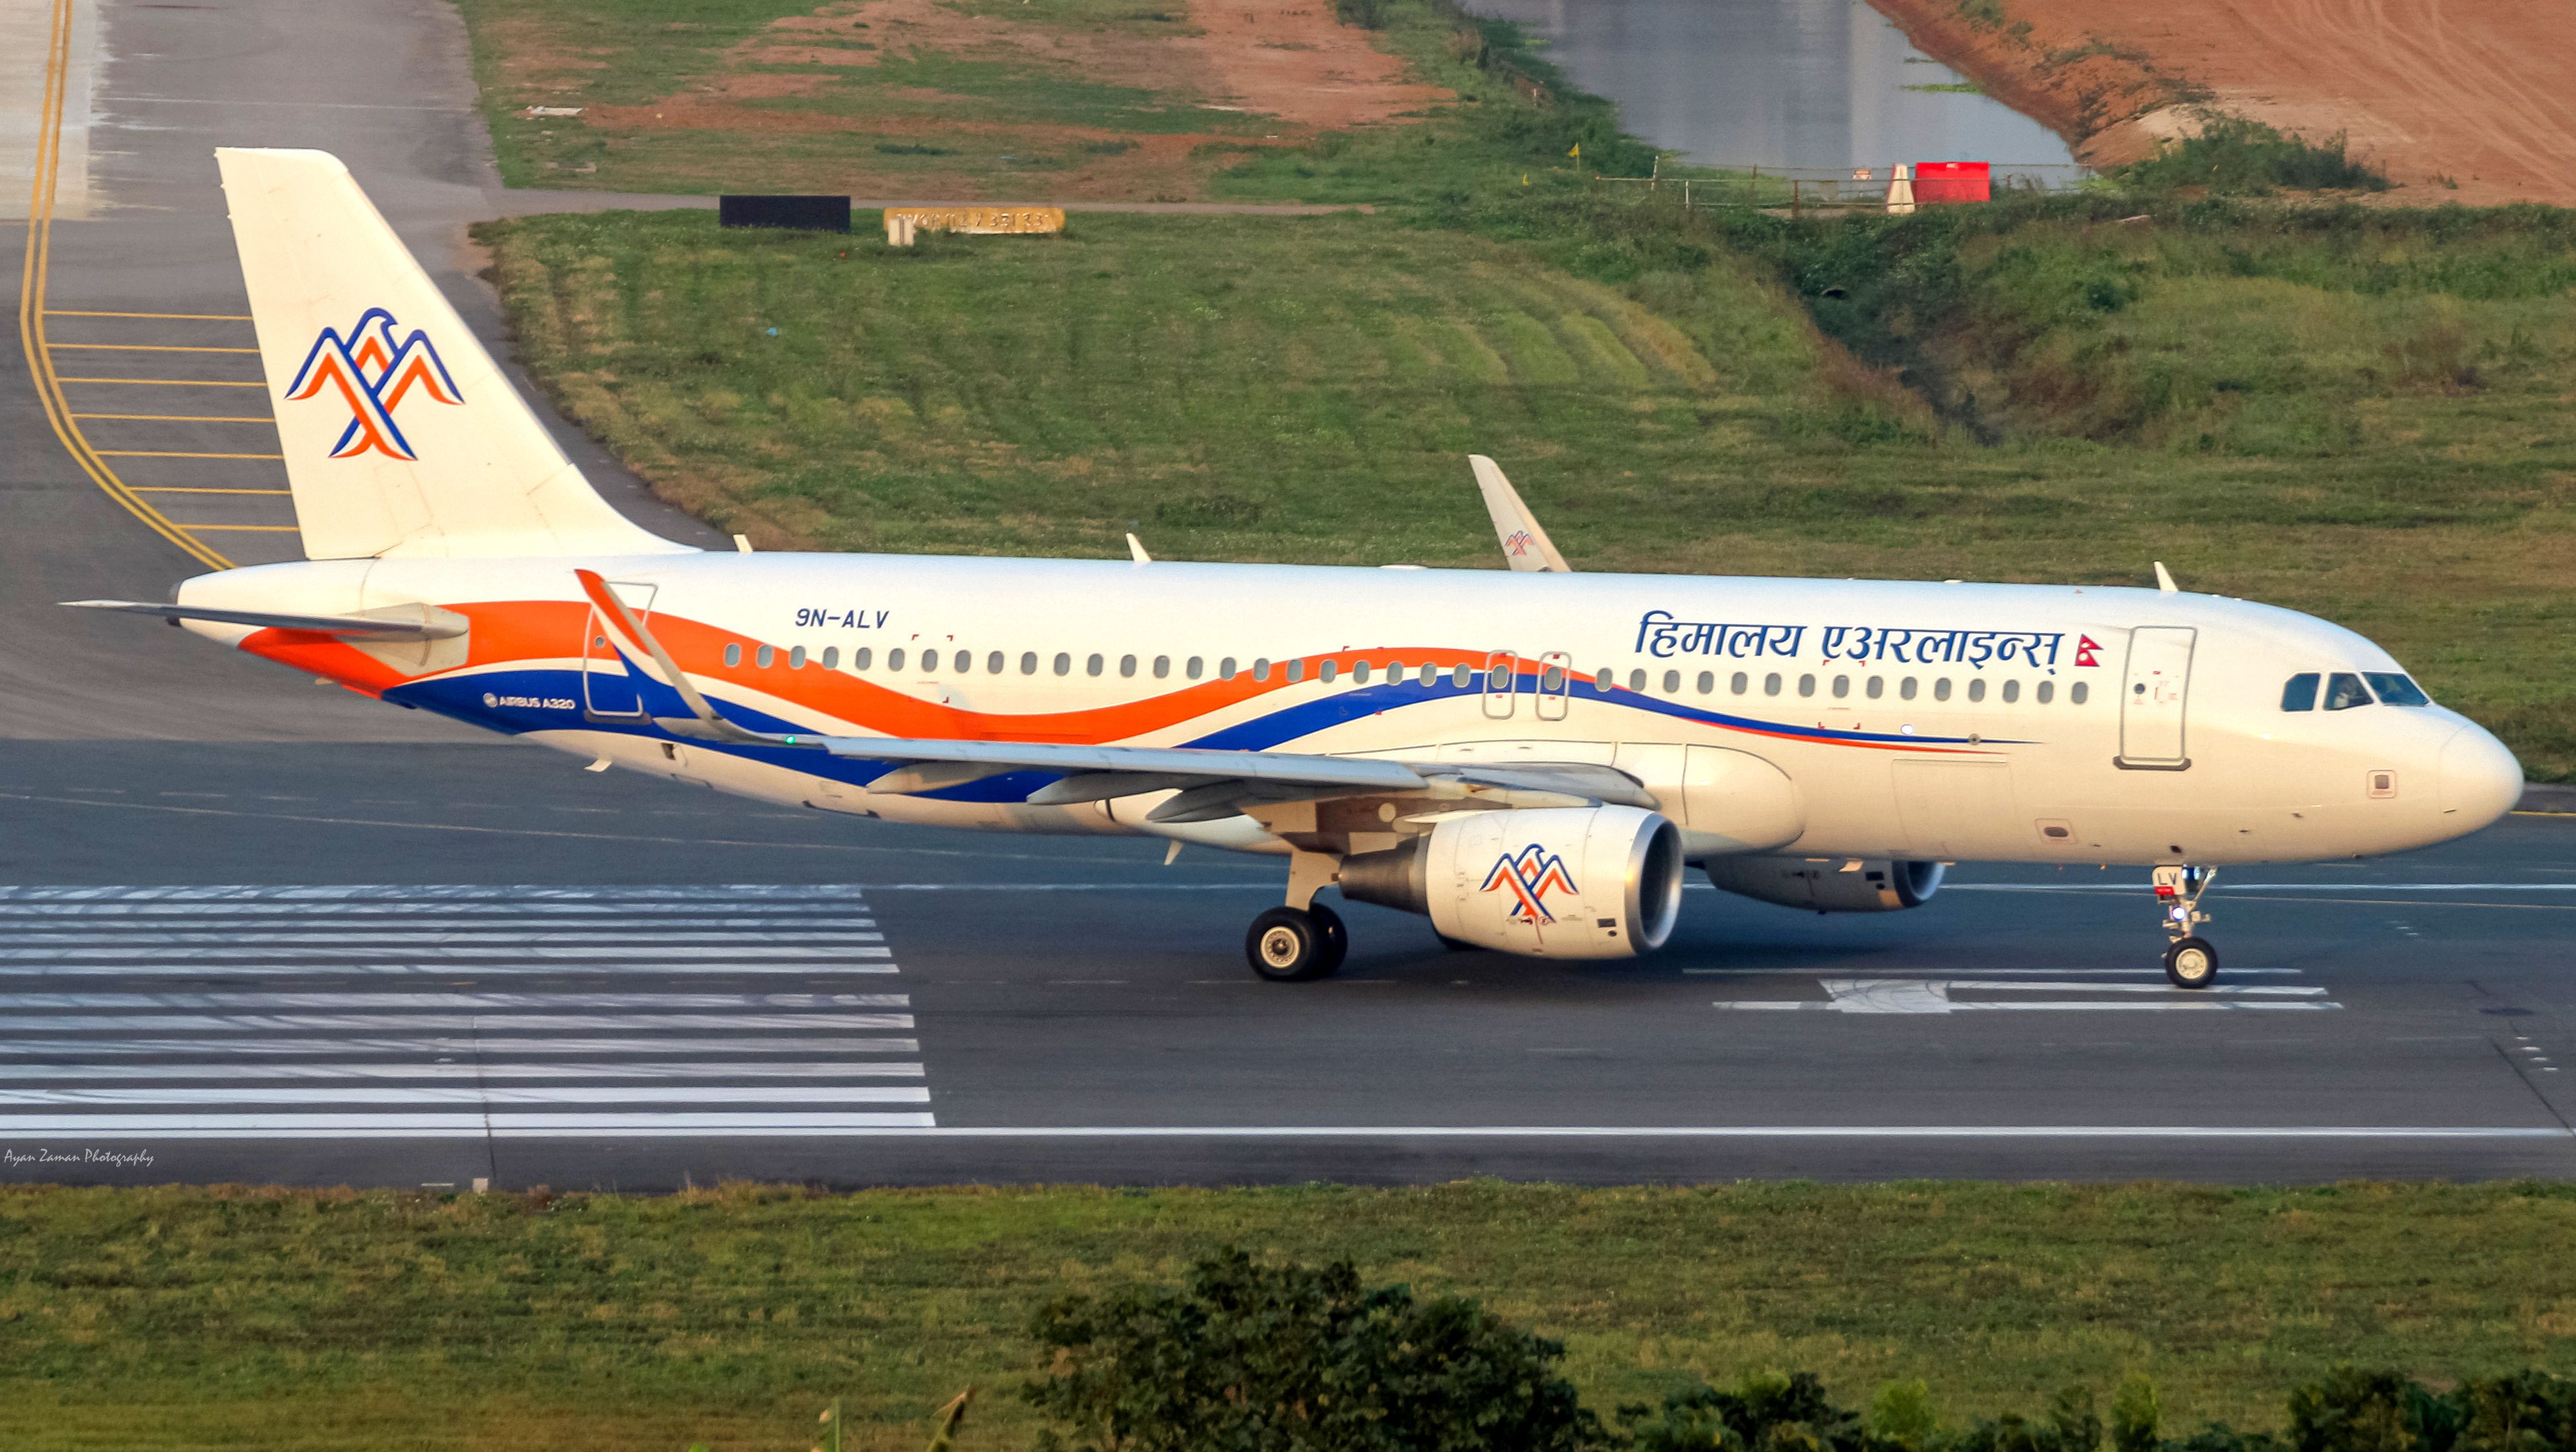 9N-ALV_-_Himalaya_Airlines_-_Airbus_A320-214(WL)_-_MSN_7503_-_VGHS